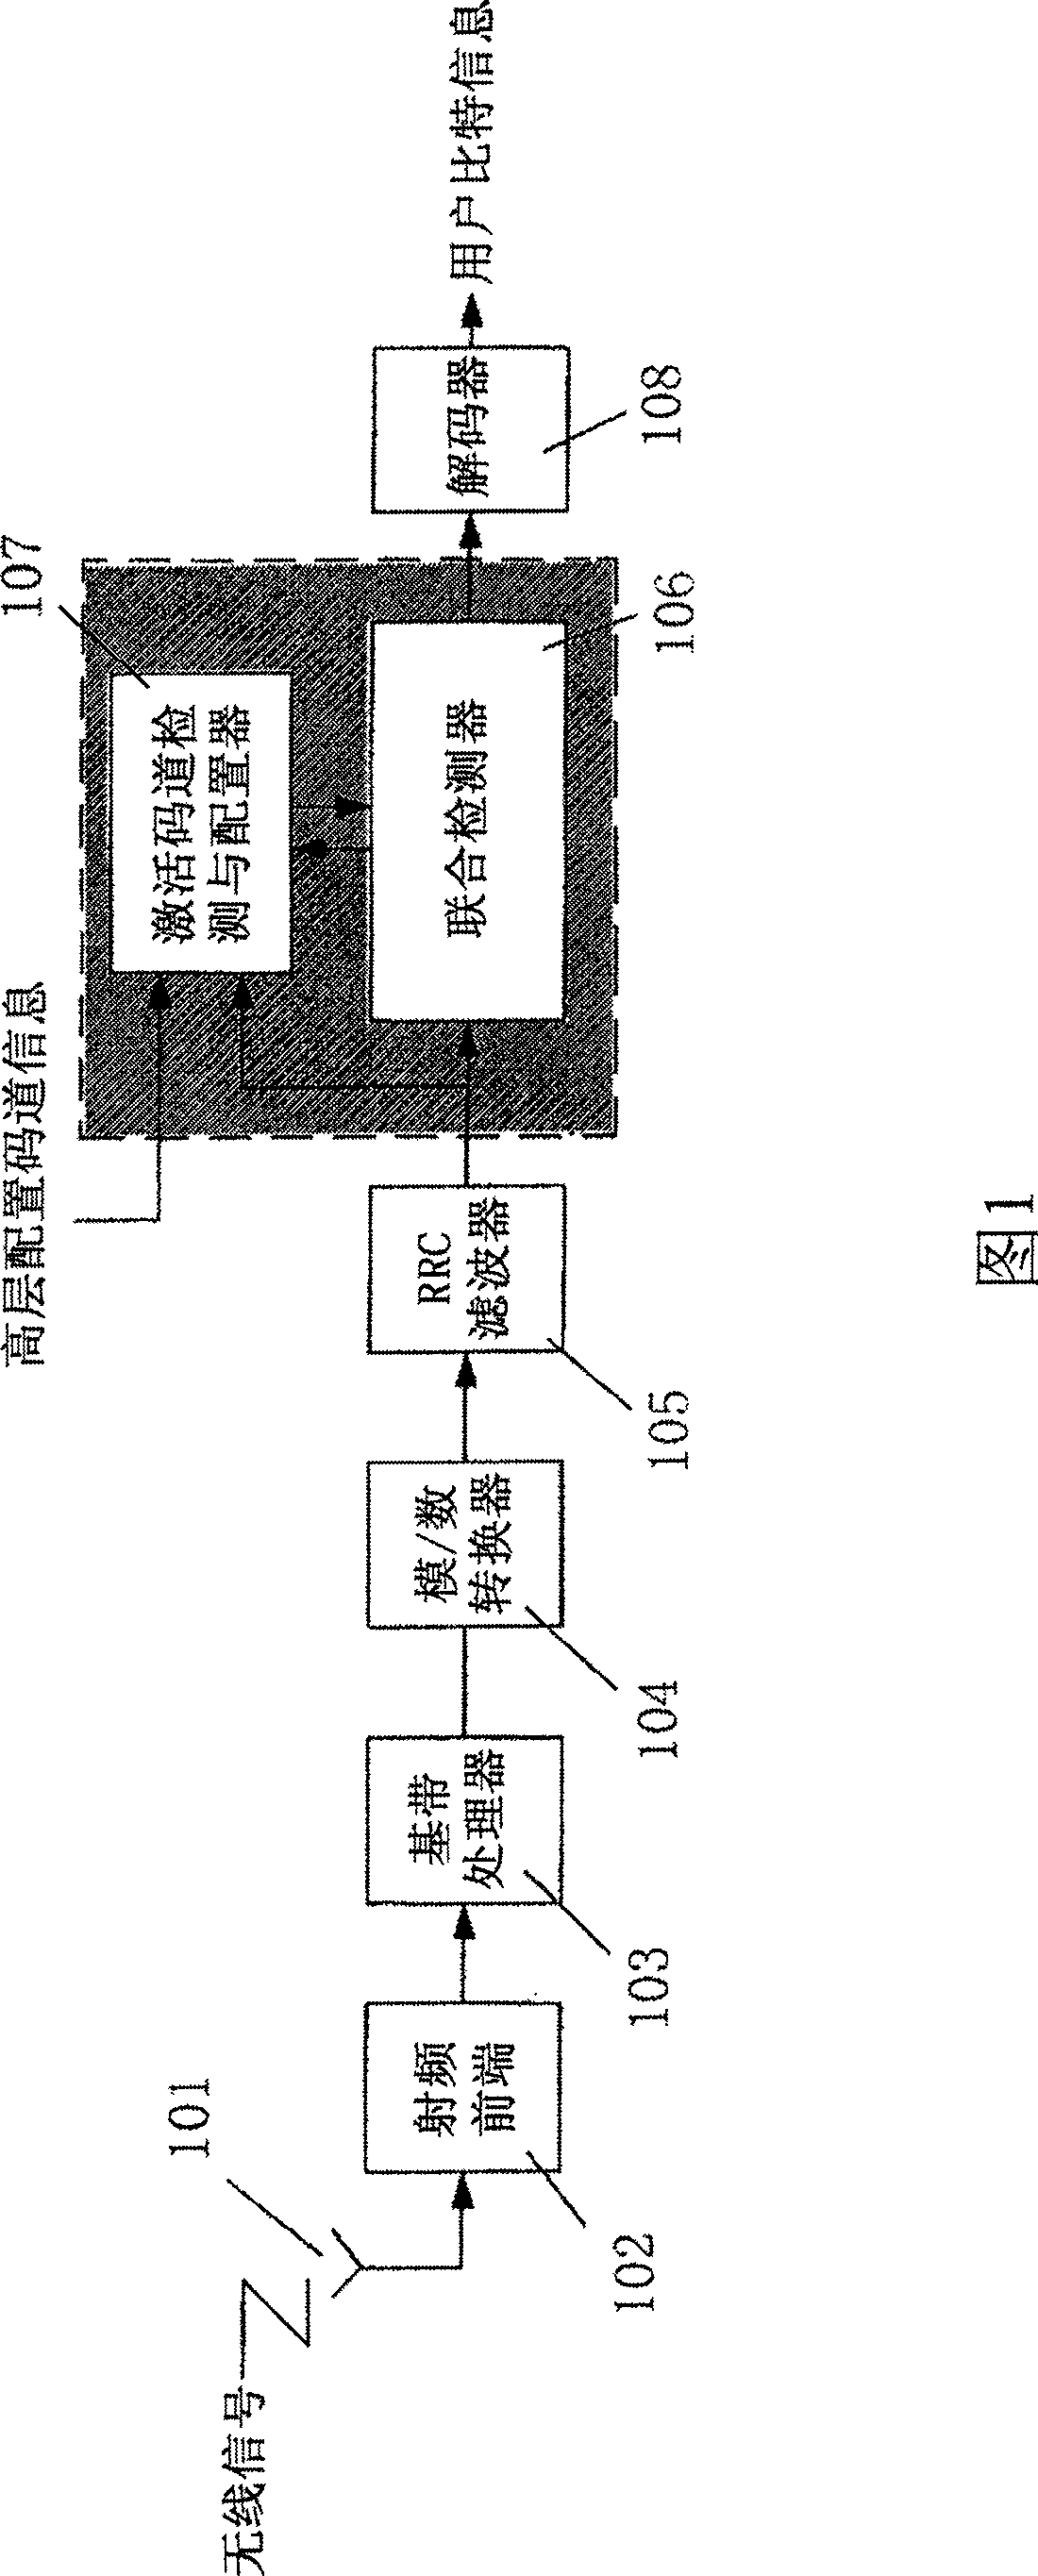 Mobile terminal, joint receiver, activated code channel information detection and allocating device and its method